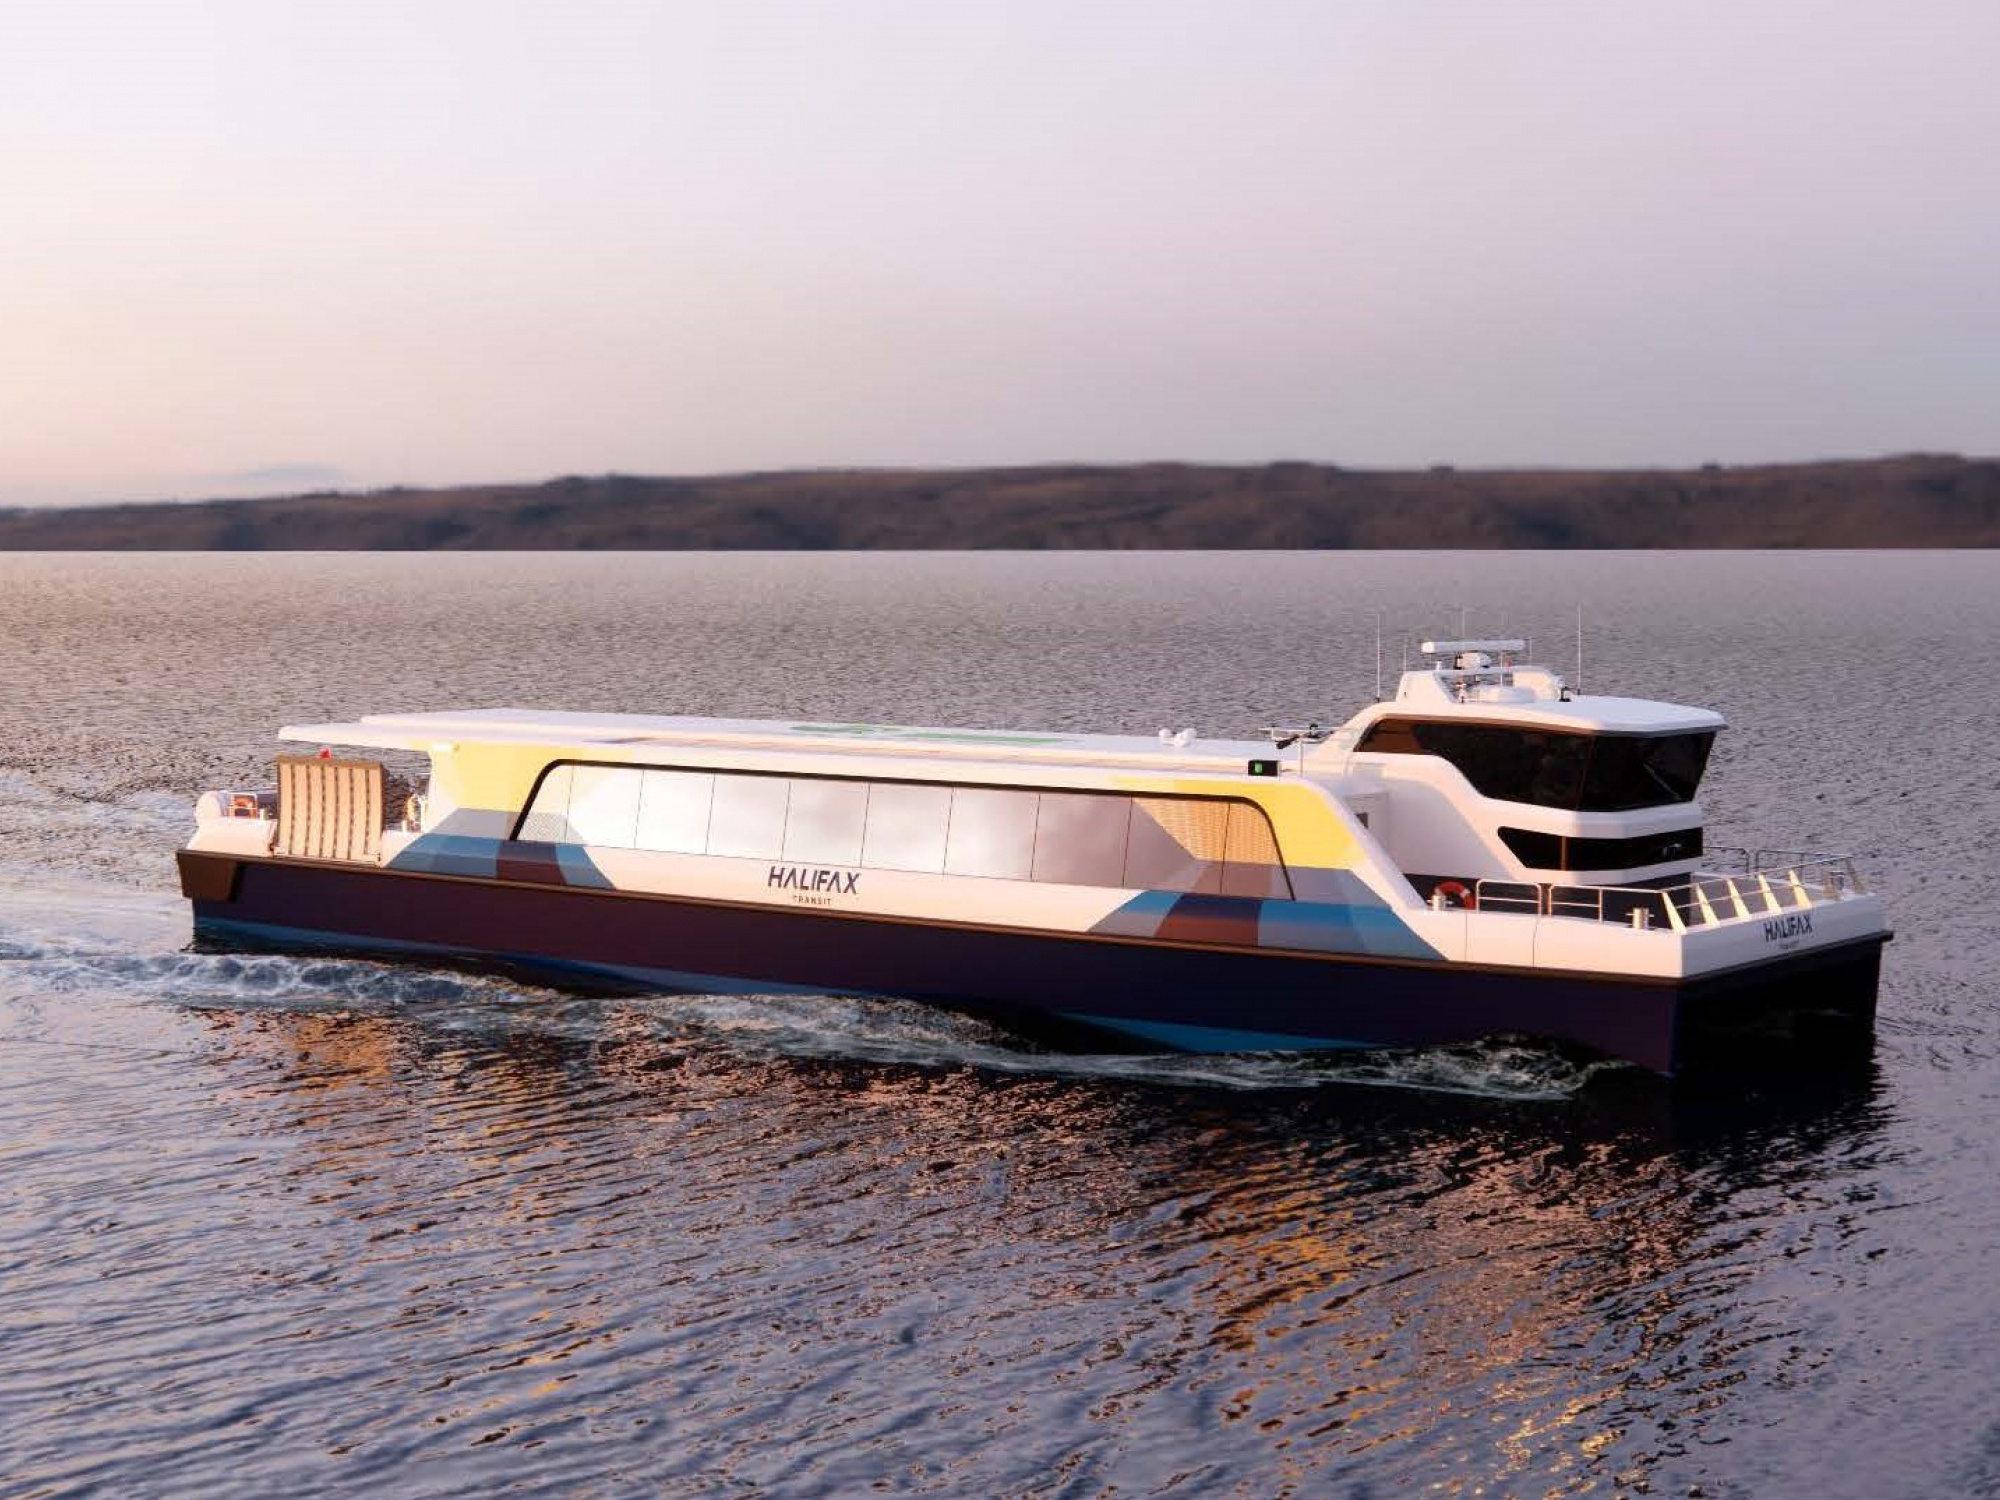 Rendering of proposed ferry in water